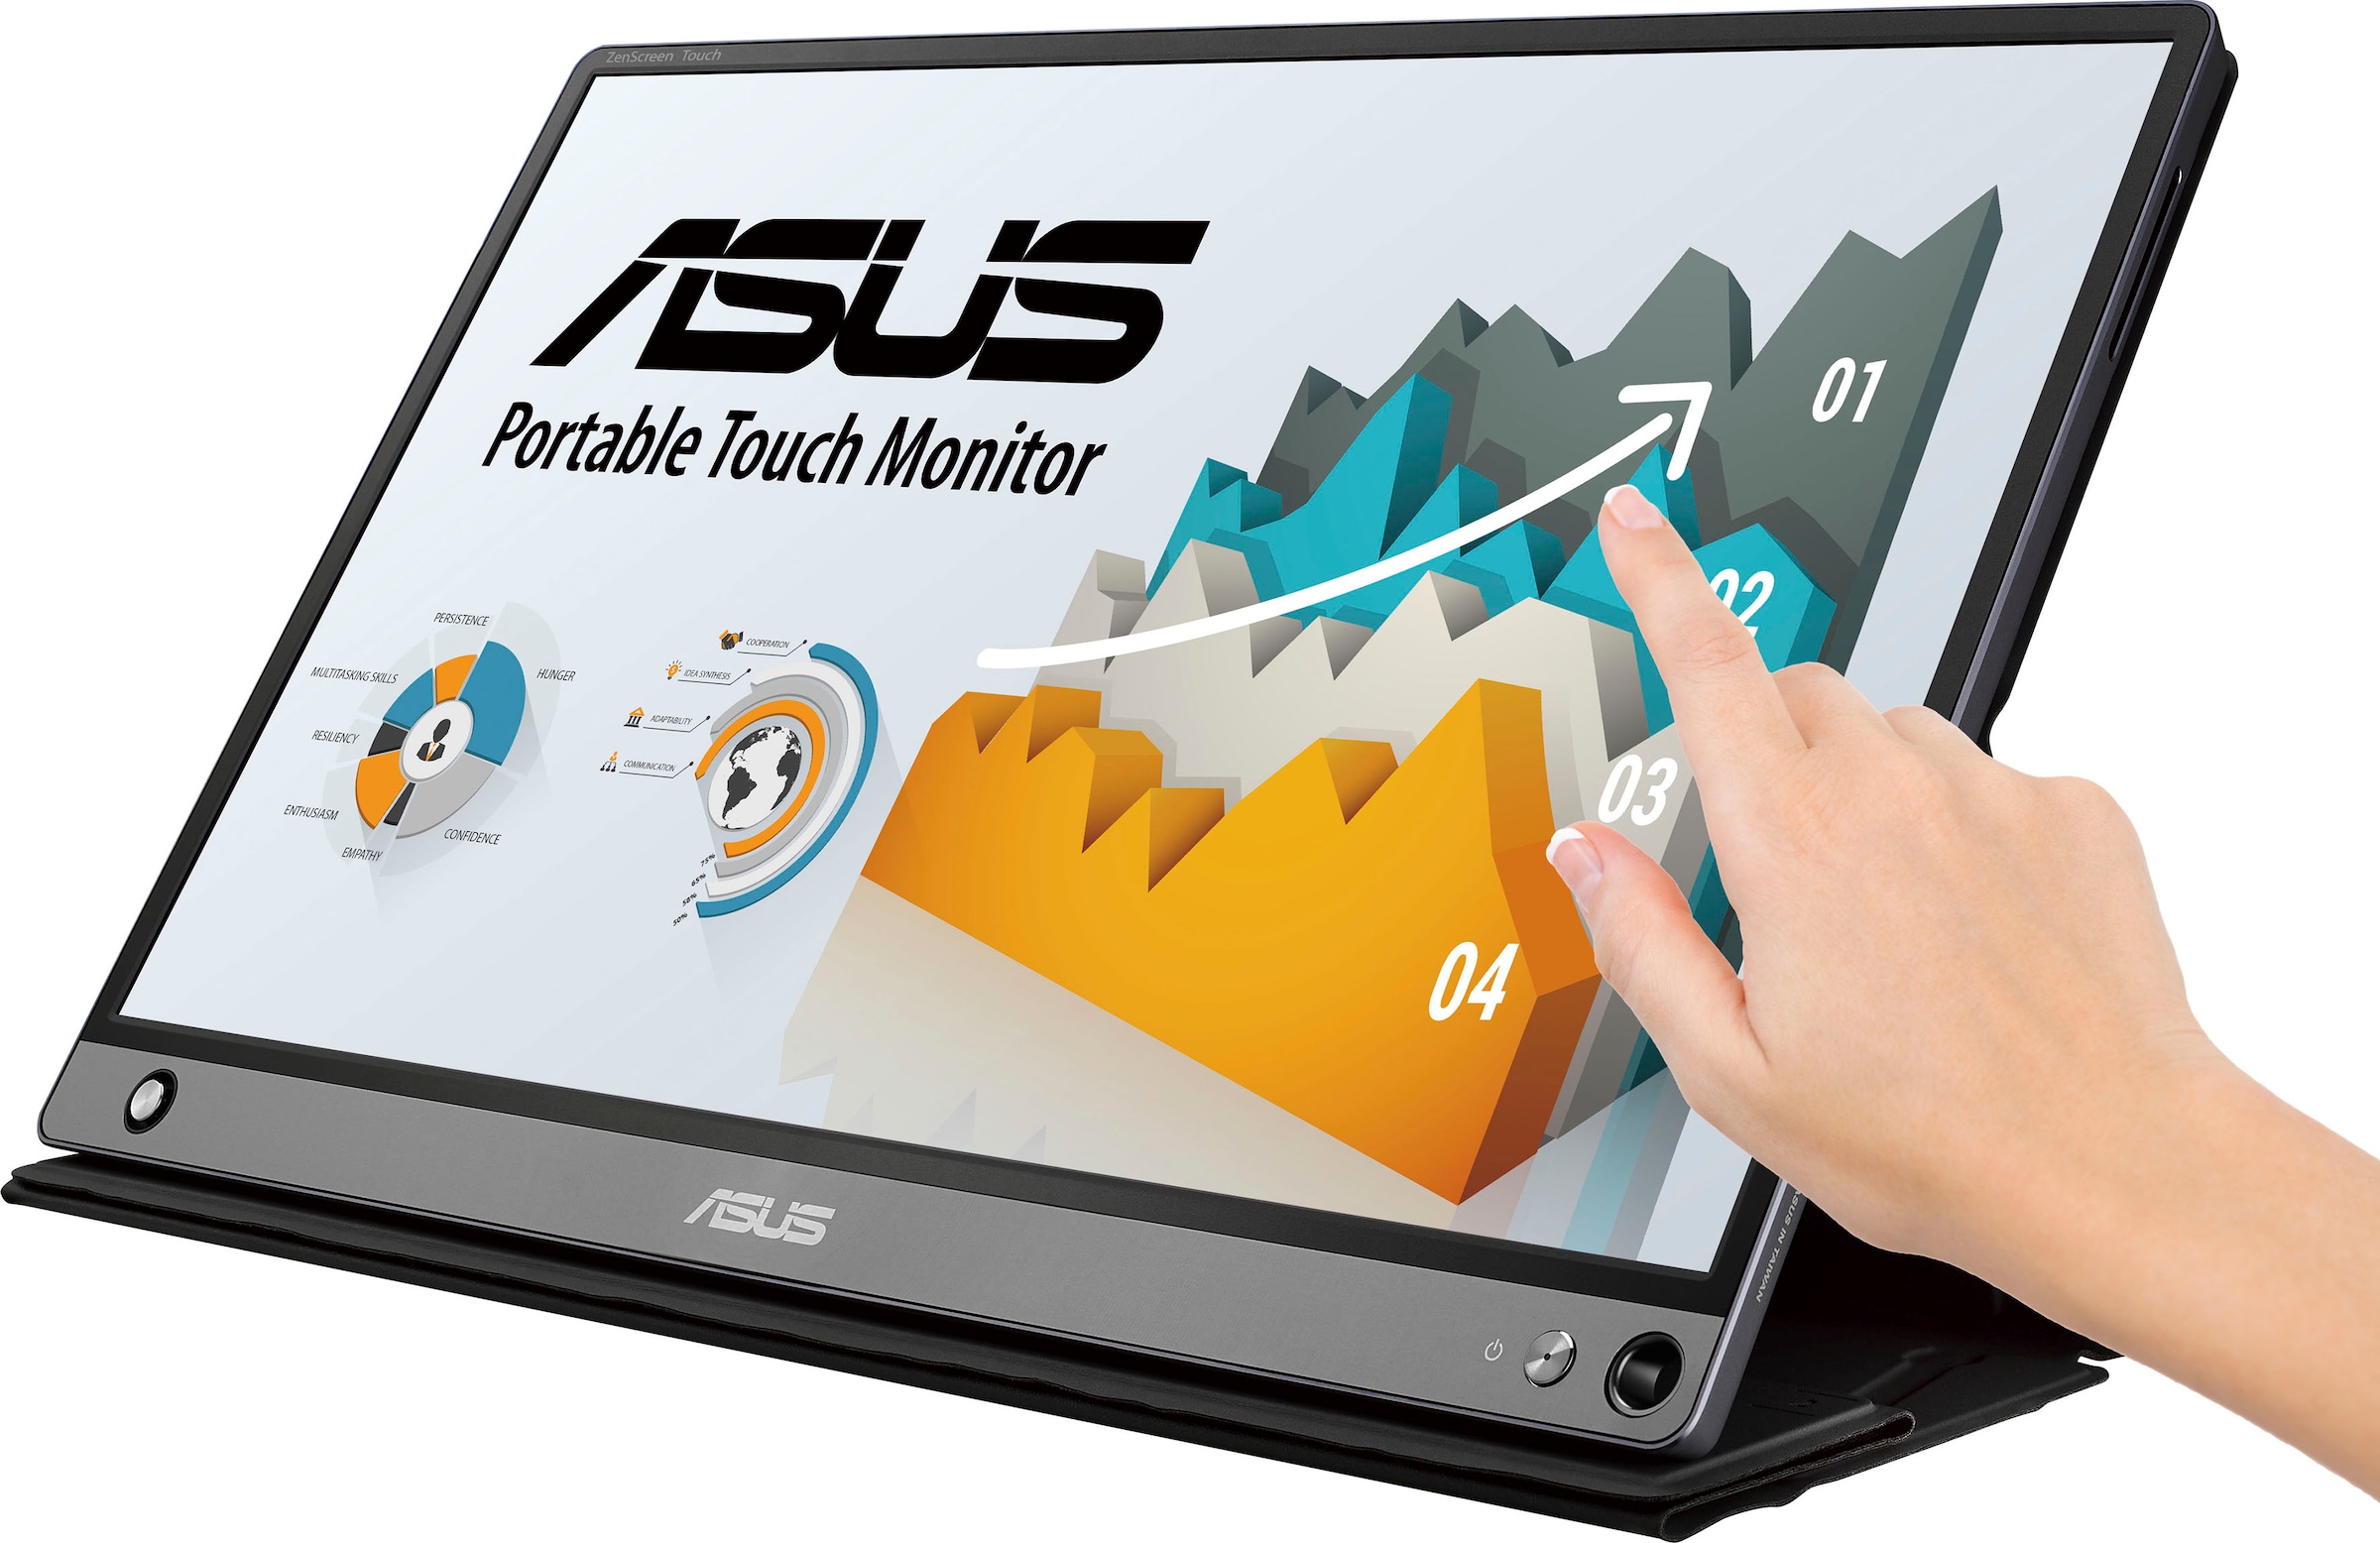 Asus Portabler Monitor »MB16AMT«, 40 cm/16 Zoll, 1920 x 1080 px, Full HD, 5 ms Reaktionszeit, 60 Hz